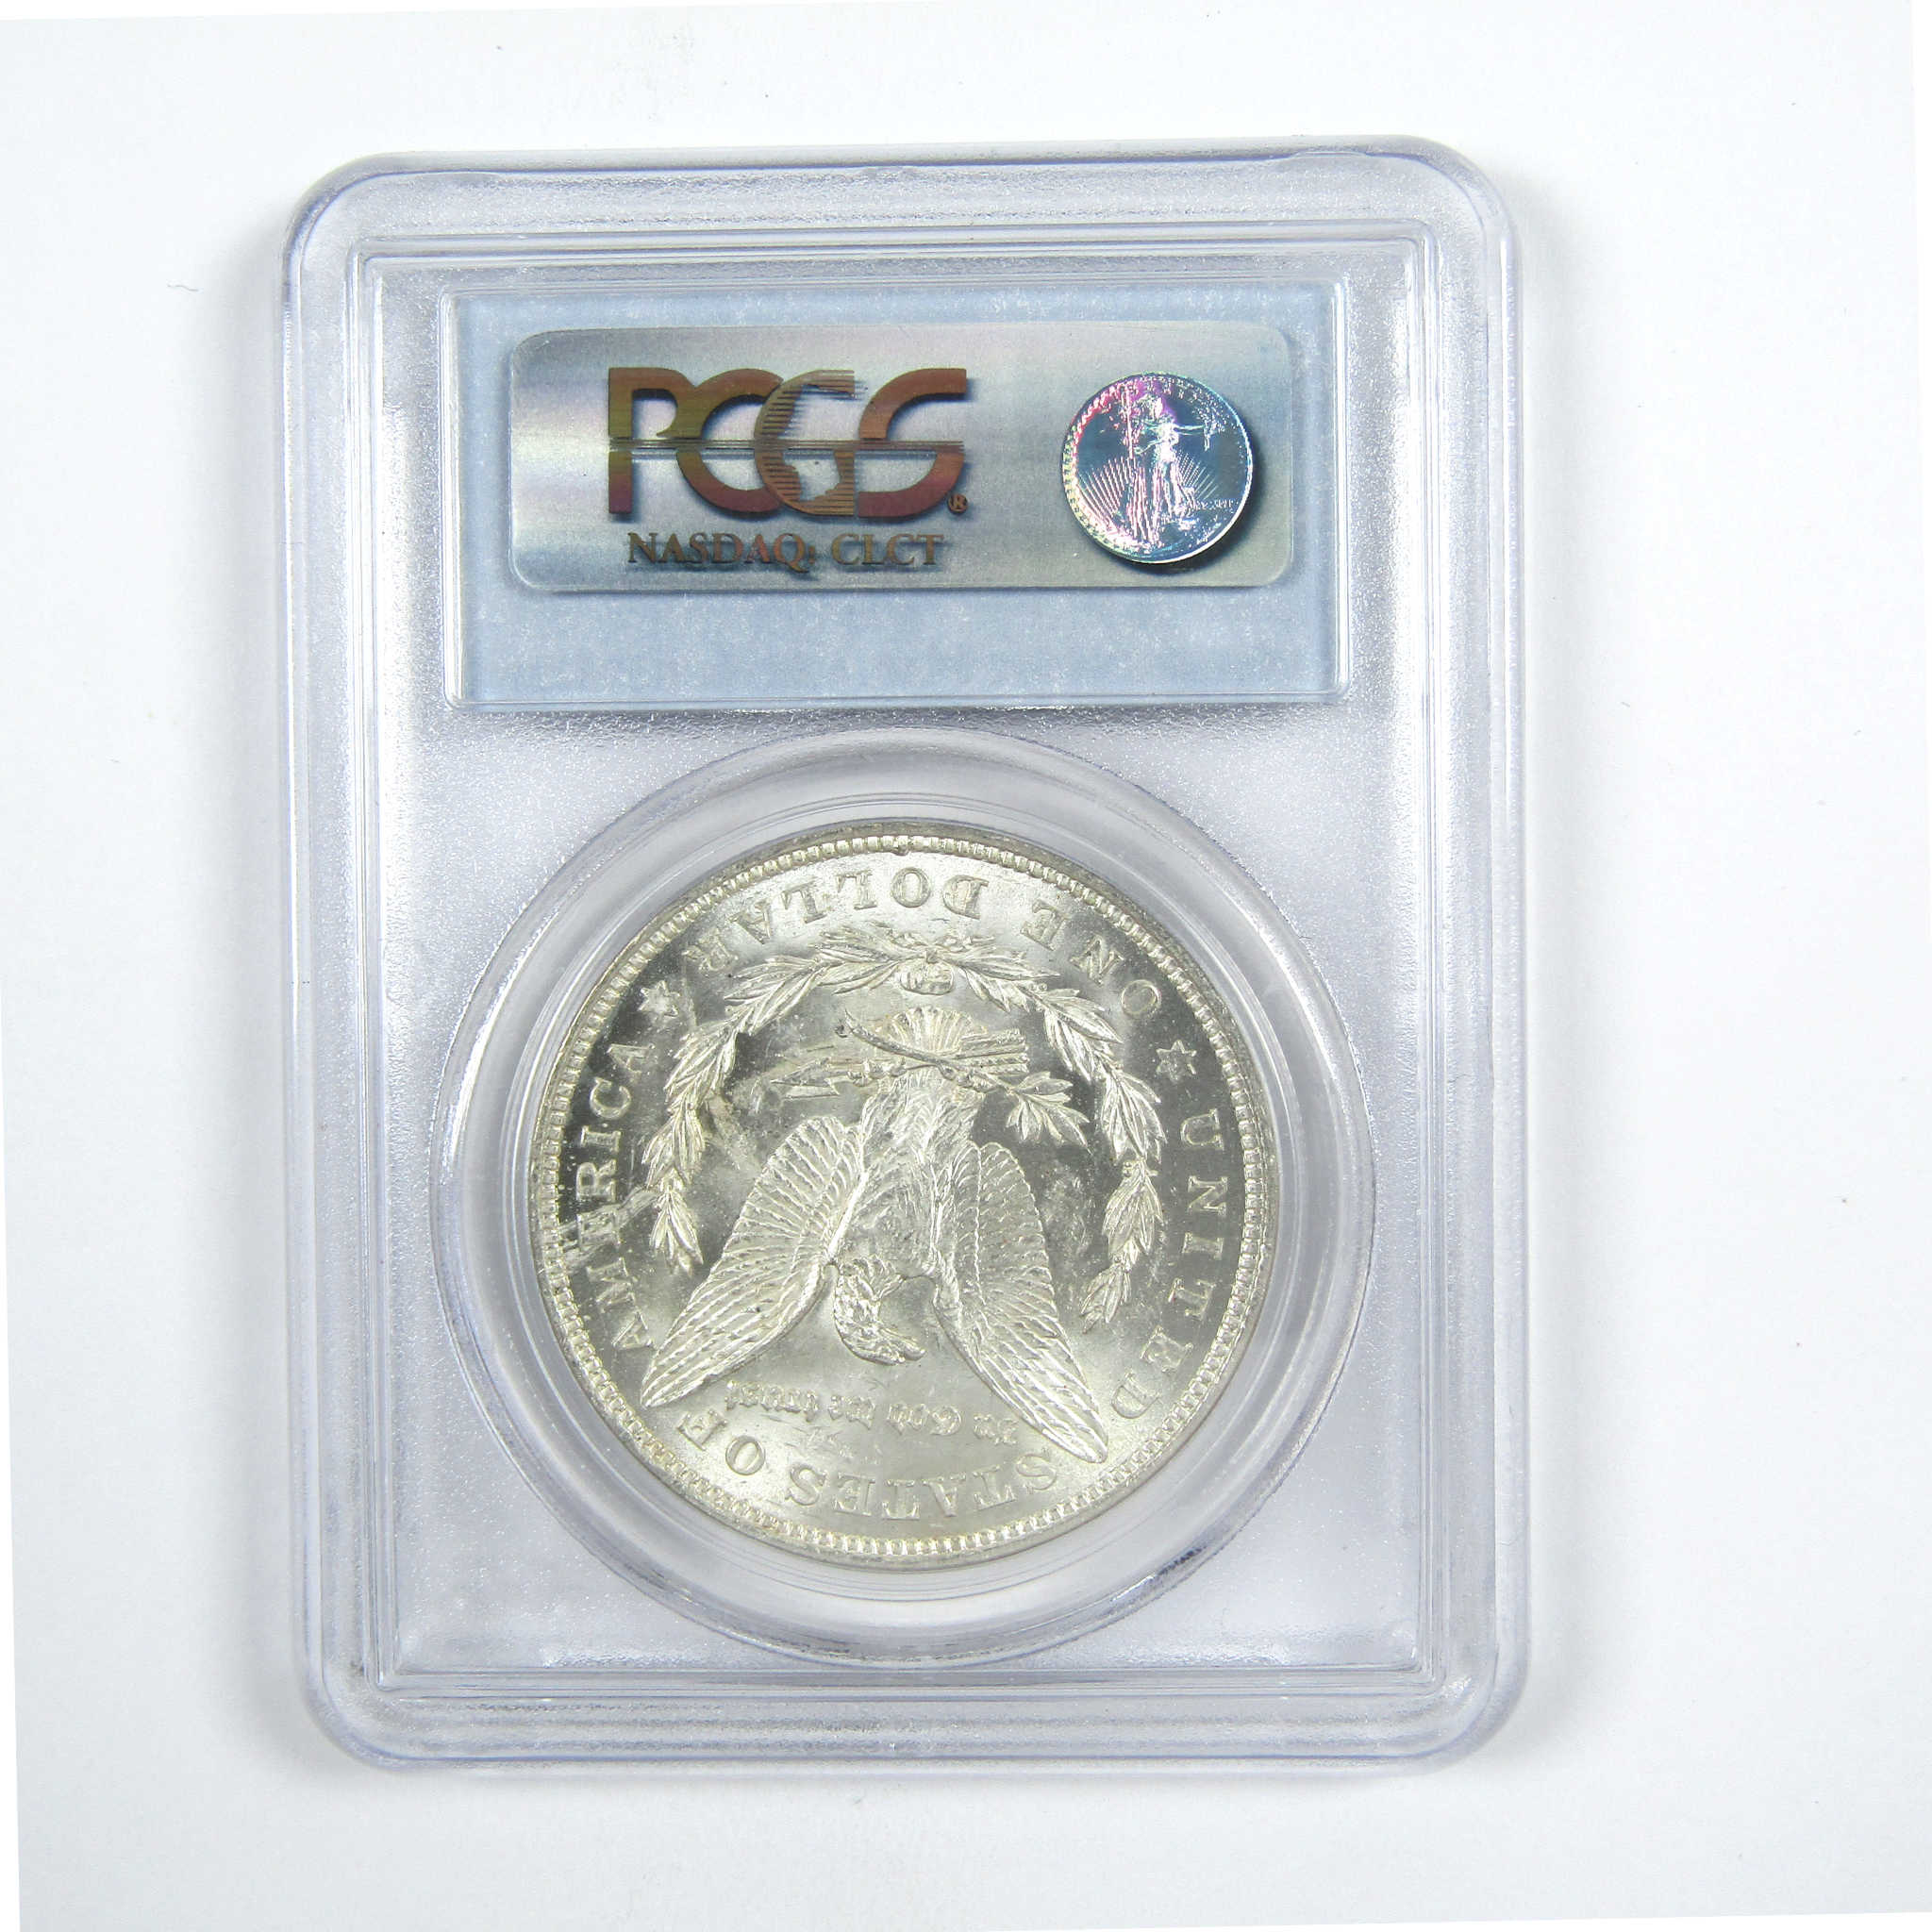 1921 Pitted Reverse Morgan Dollar MS 61 PCGS Silver $1 SKU:CPC7334 - Morgan coin - Morgan silver dollar - Morgan silver dollar for sale - Profile Coins &amp; Collectibles